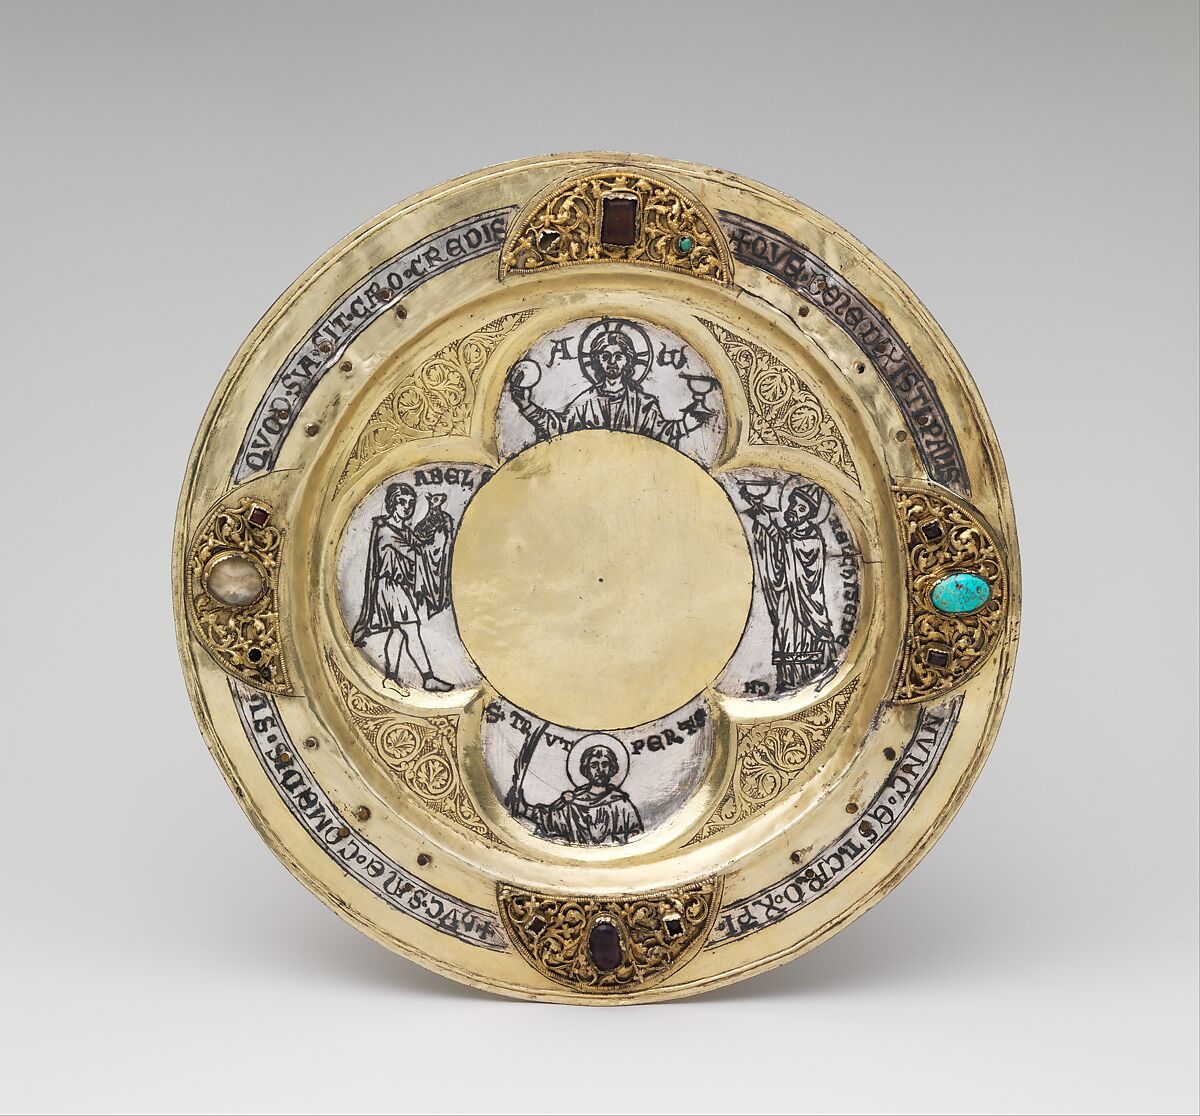 Paten, Silver, partly gilt; niello, jewels, German 